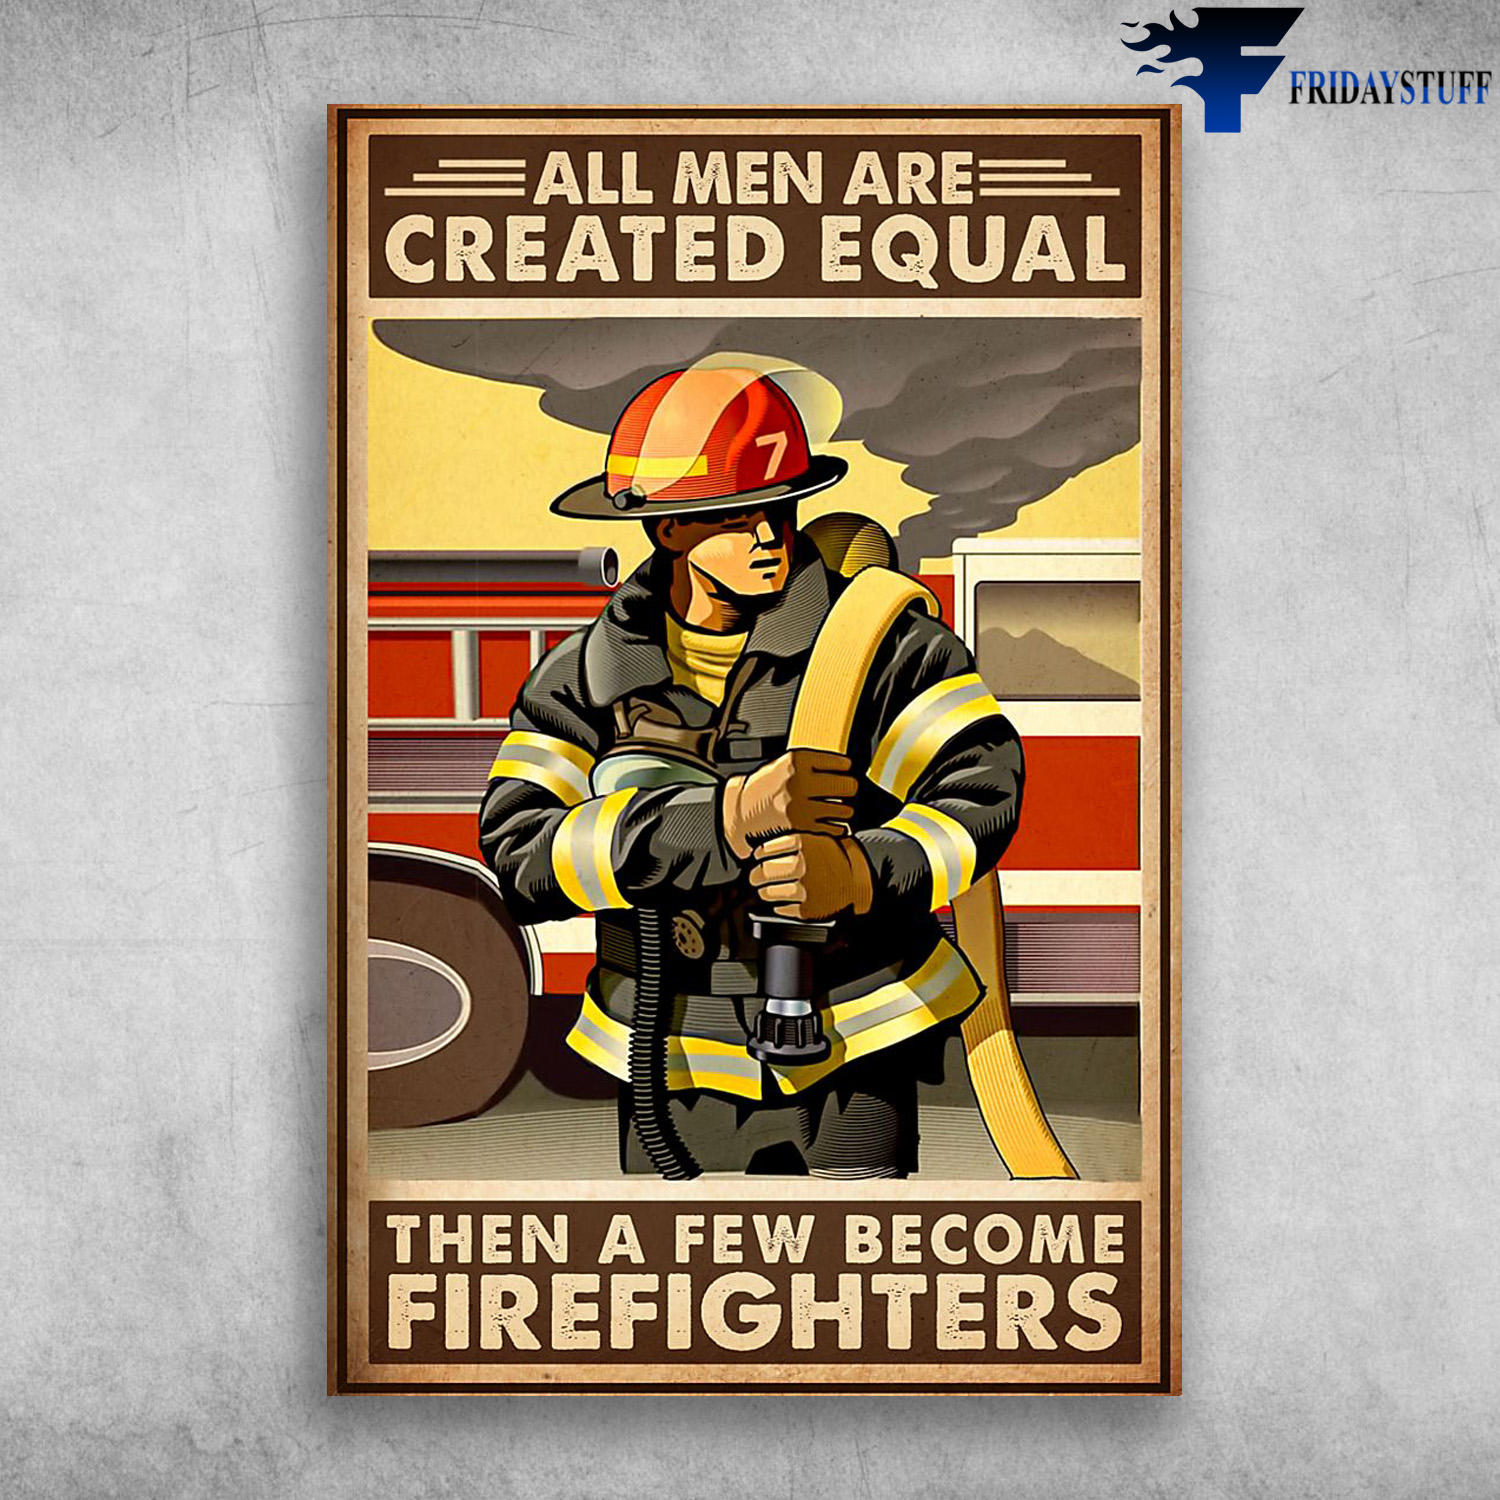 The Firefighter On Job - All Men Are Created Equal, Then A Few Become Firefighter